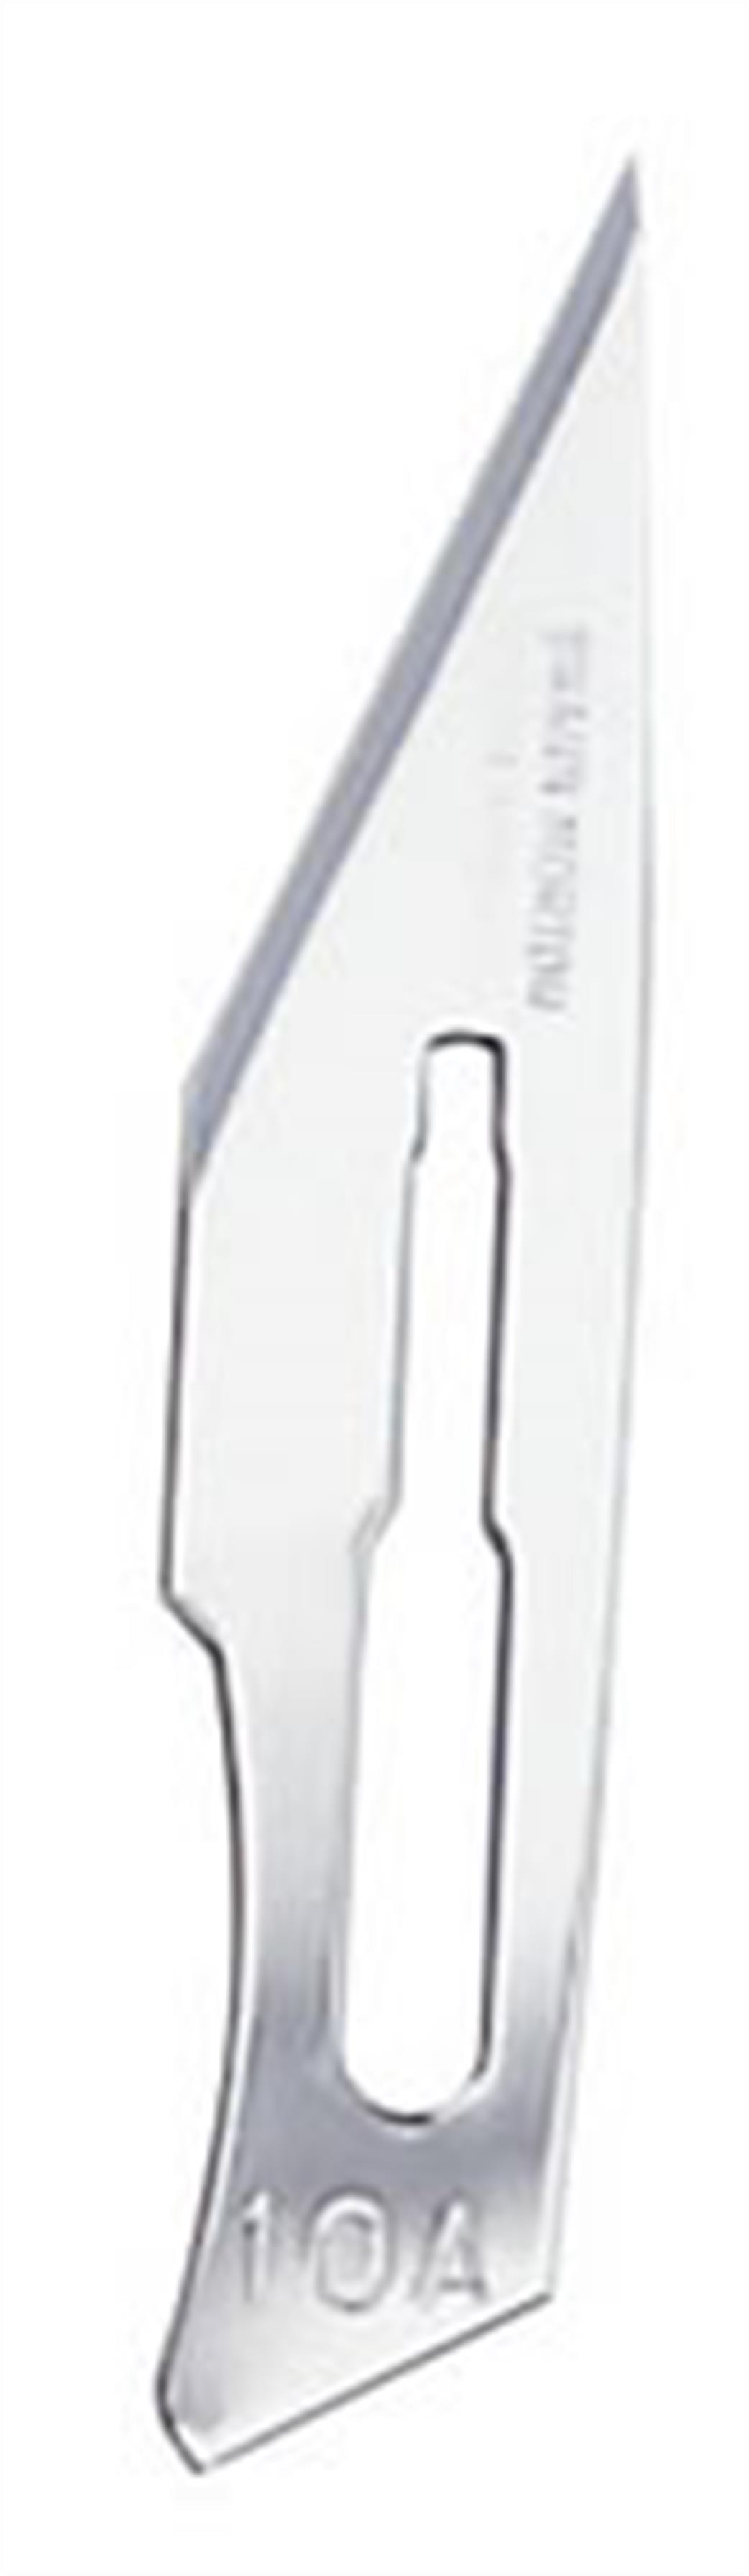 Swann Morton 0102 Number 10A Scalpel Blade Pack of 5 for No.3 Handle